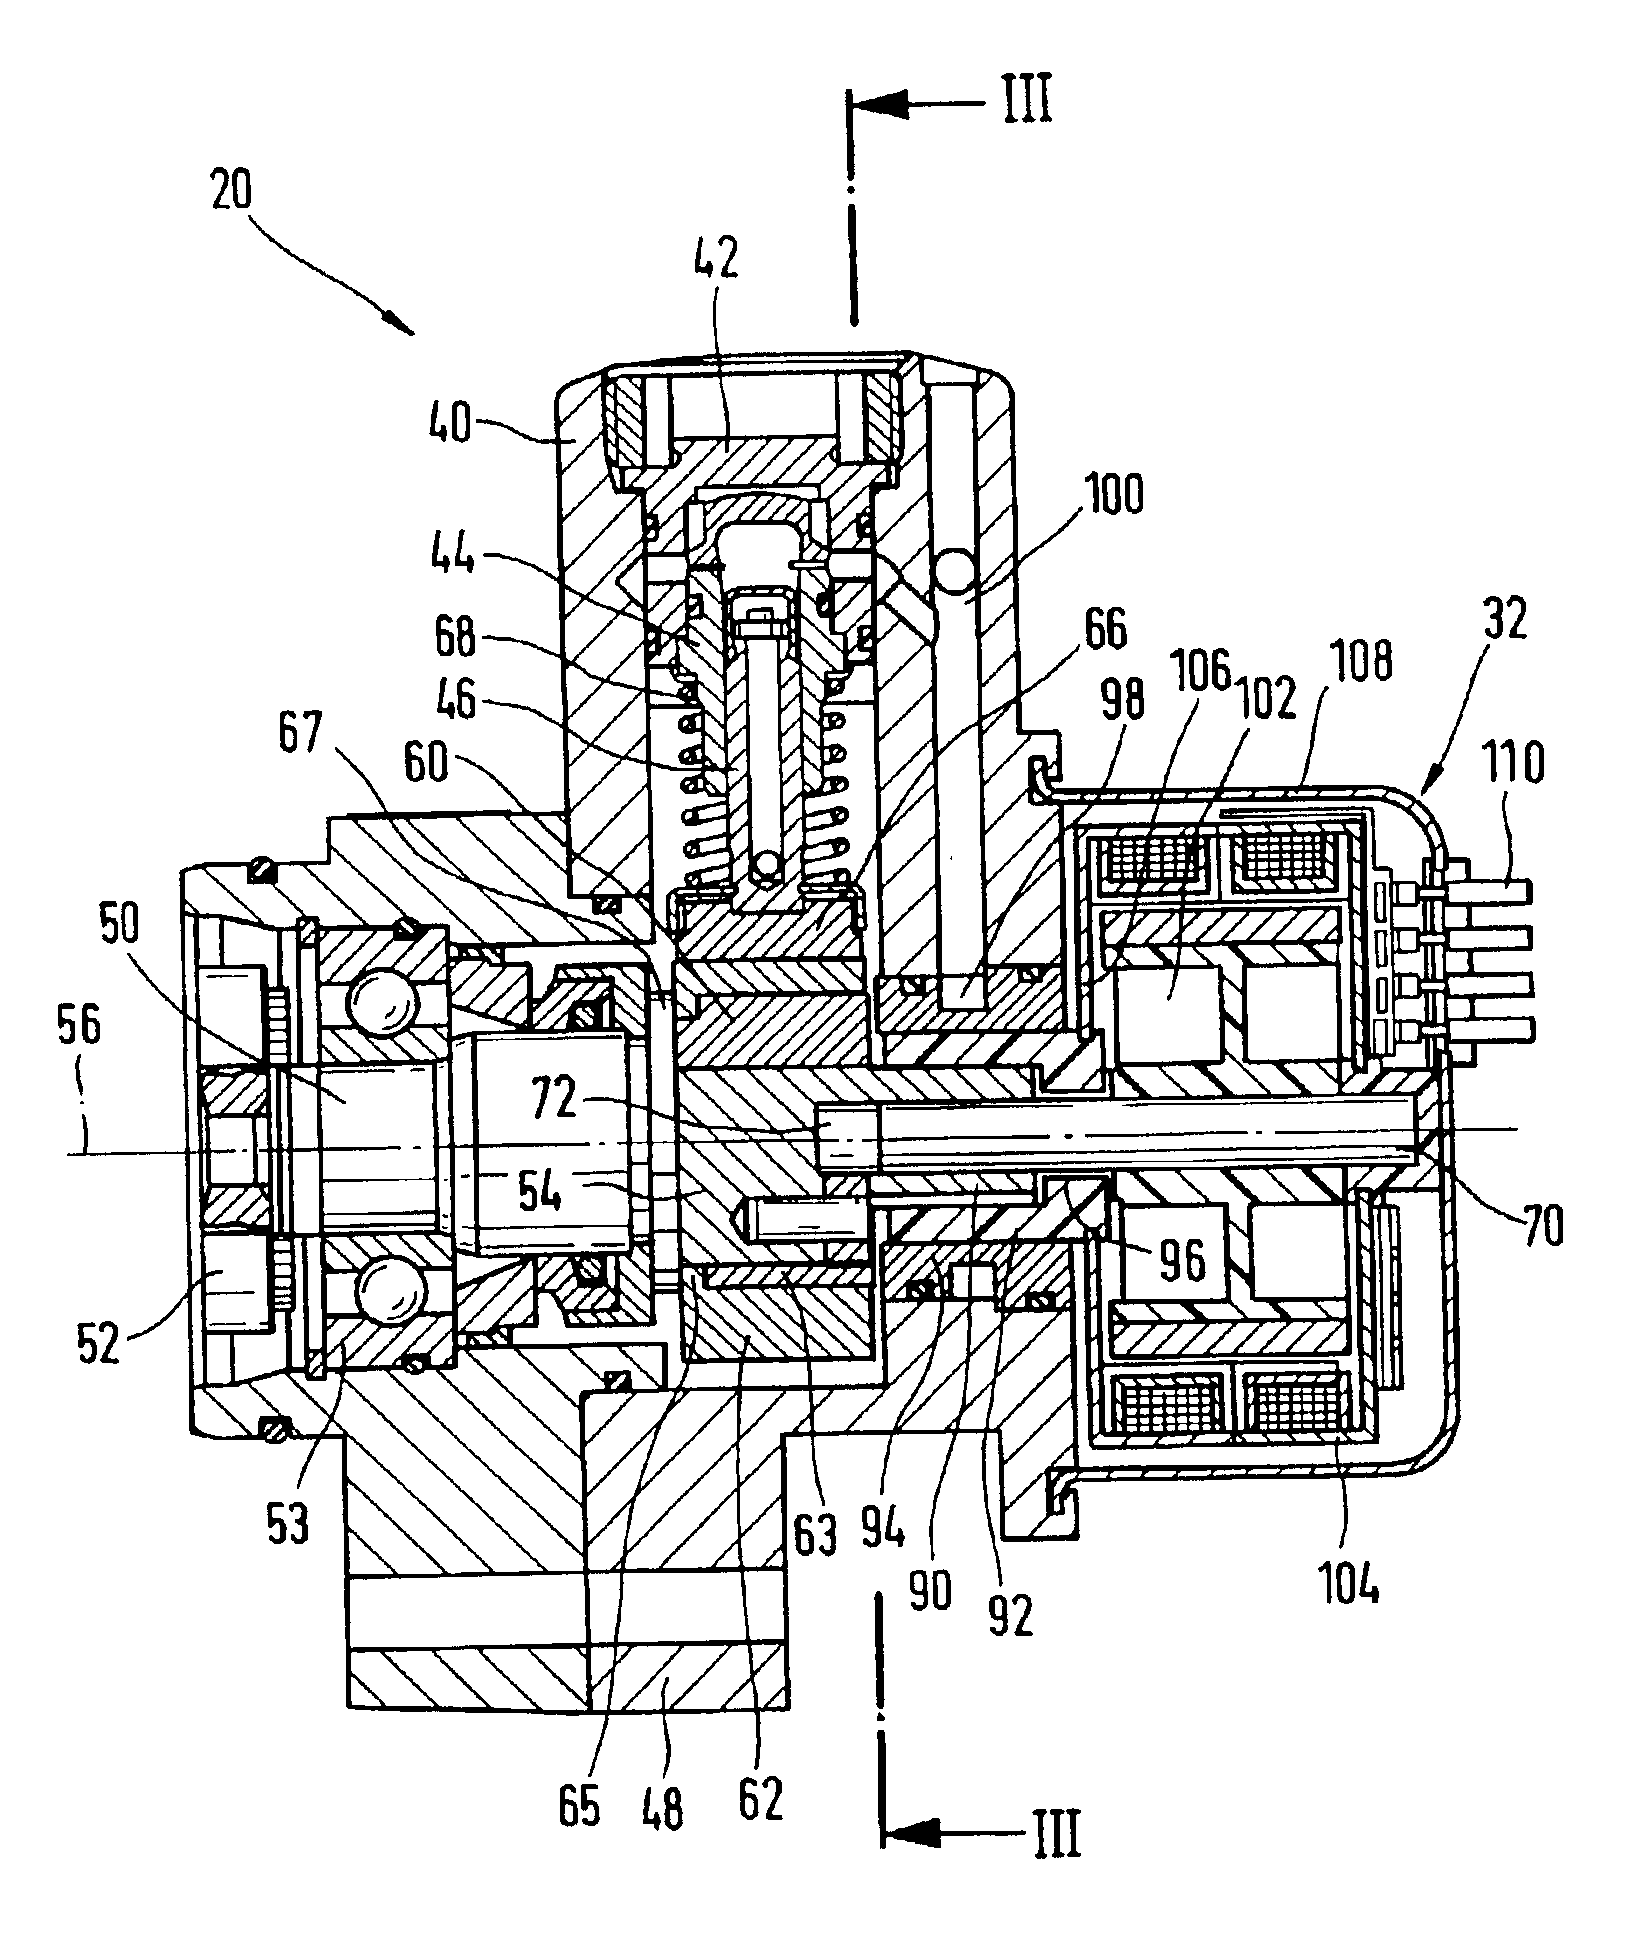 Radial piston pump for producing high fuel pressure, as well as method for operating an internal combustion engine, computer program, and control and/or regulating unit